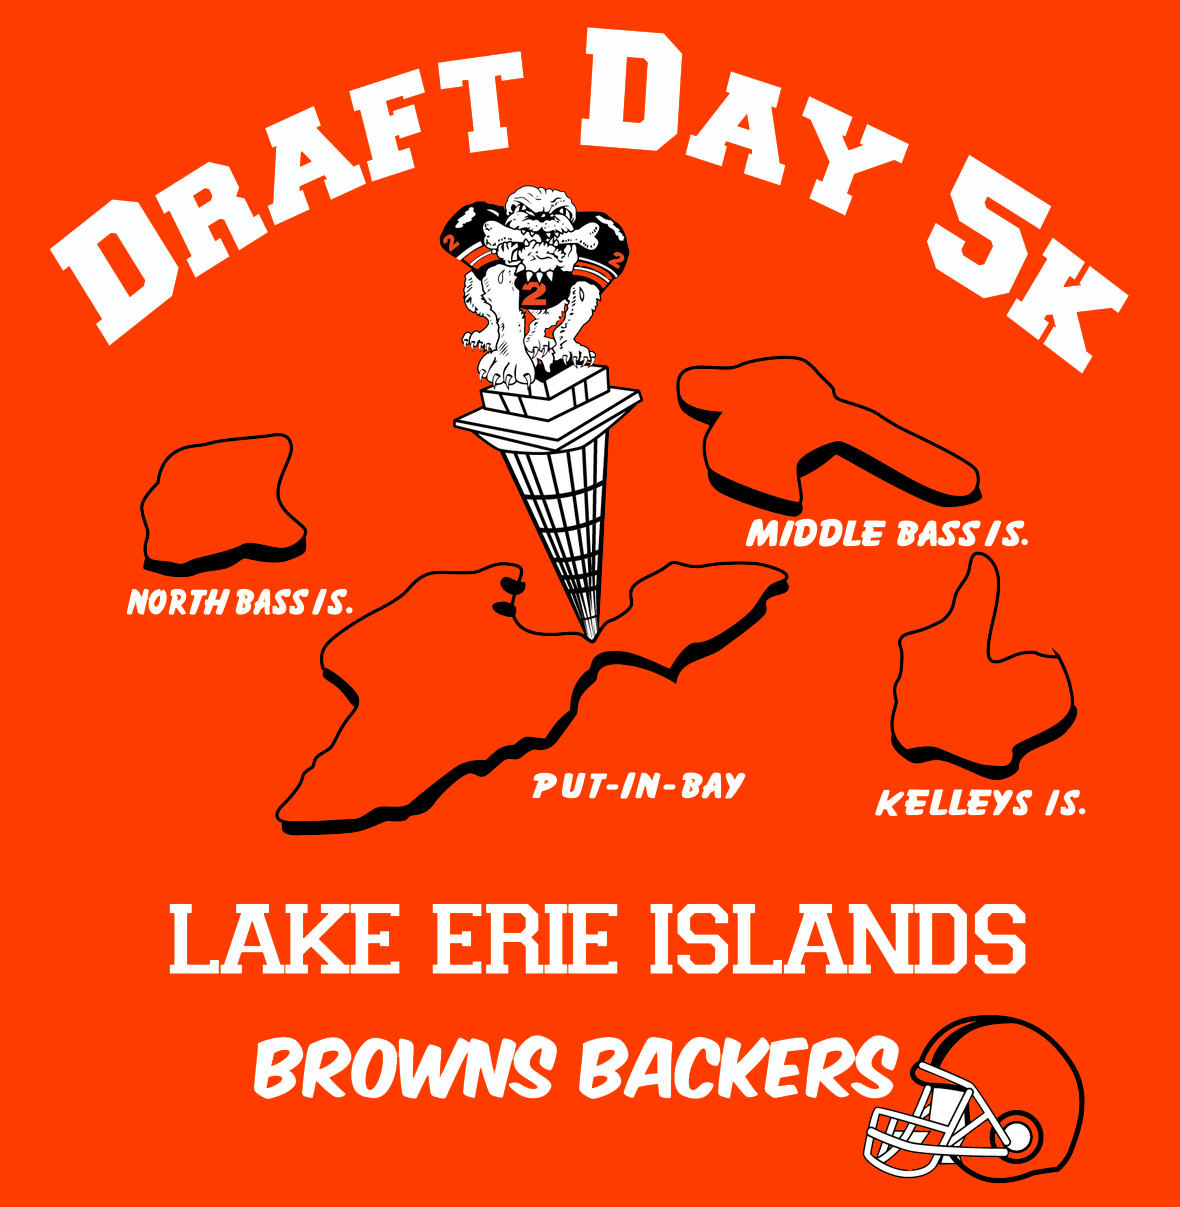 Draft Day 5k at Put-in-Bay Race Logo - Lake Erie Islands Browns Backers - USA Race Timing & Event Management